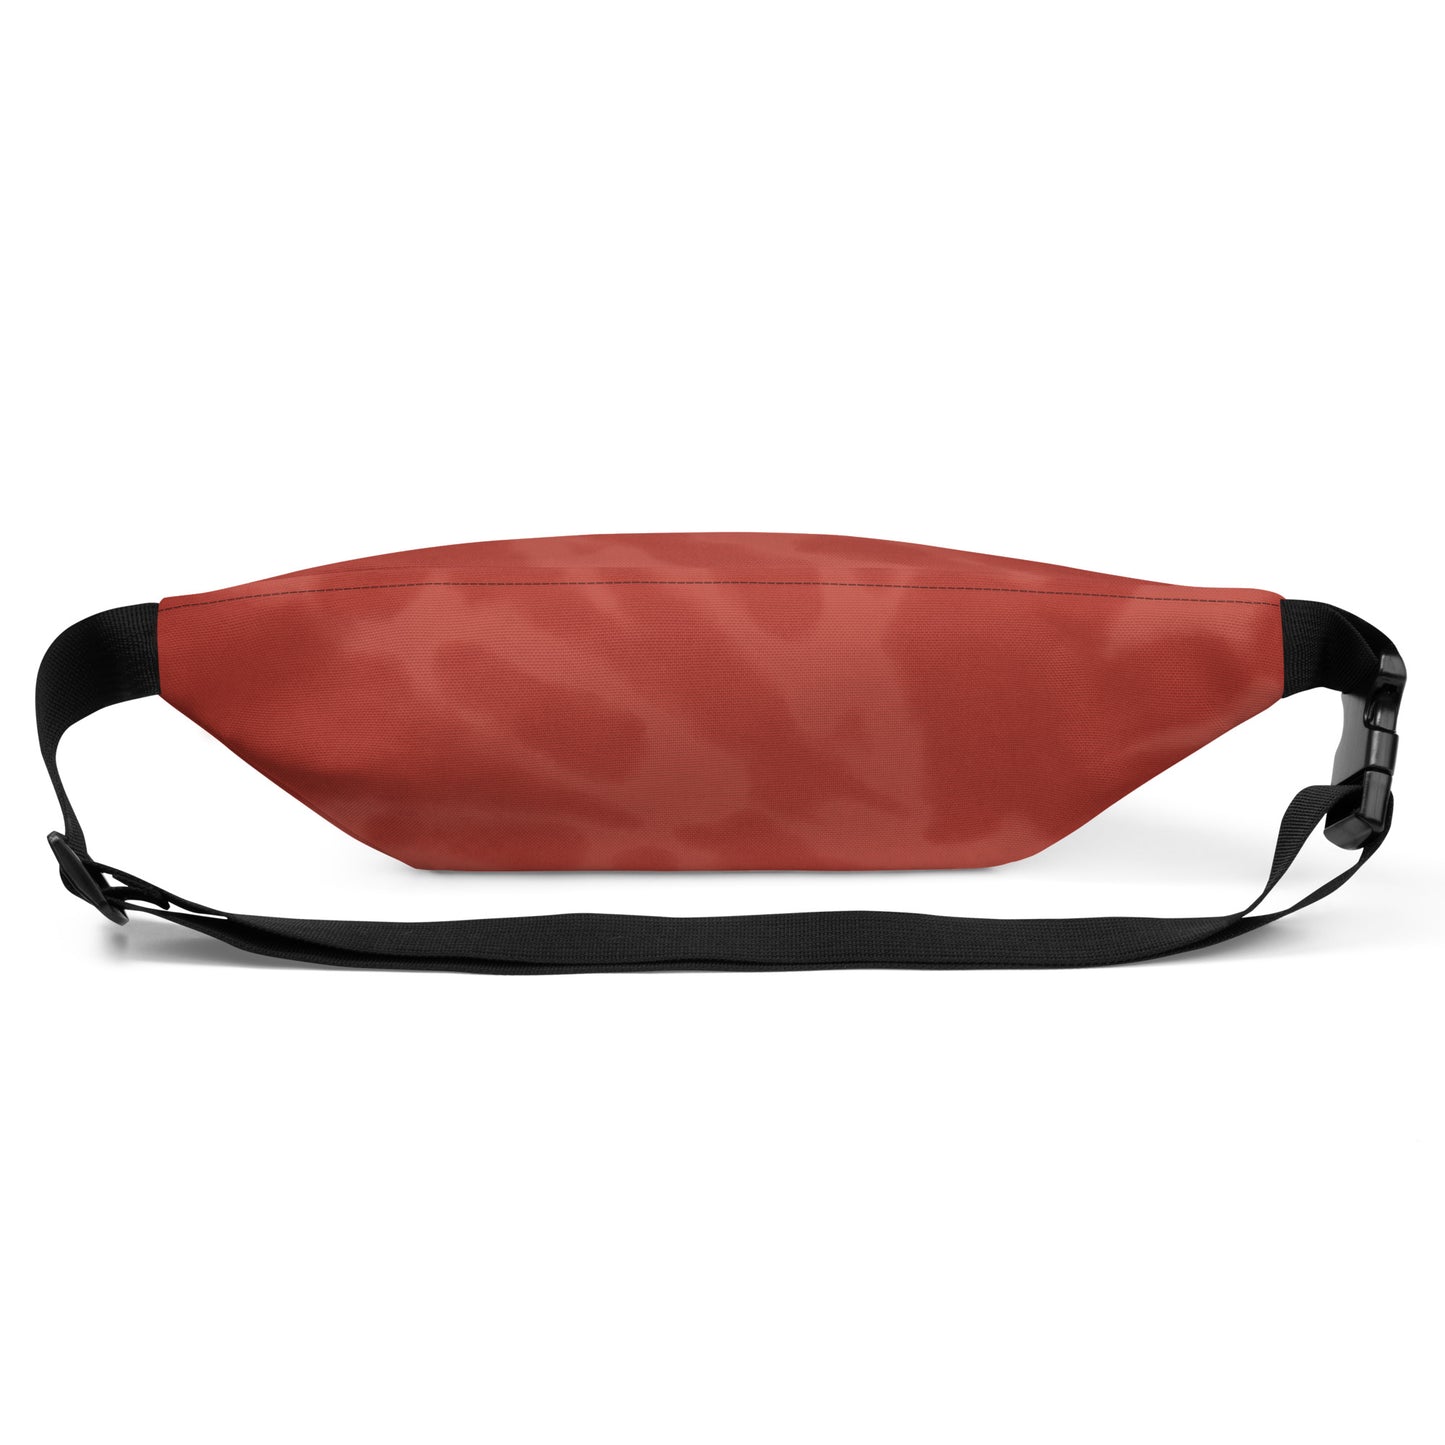 Travel Gift Fanny Pack - Red Tie-Dye • HND Tokyo • YHM Designs - Image 09